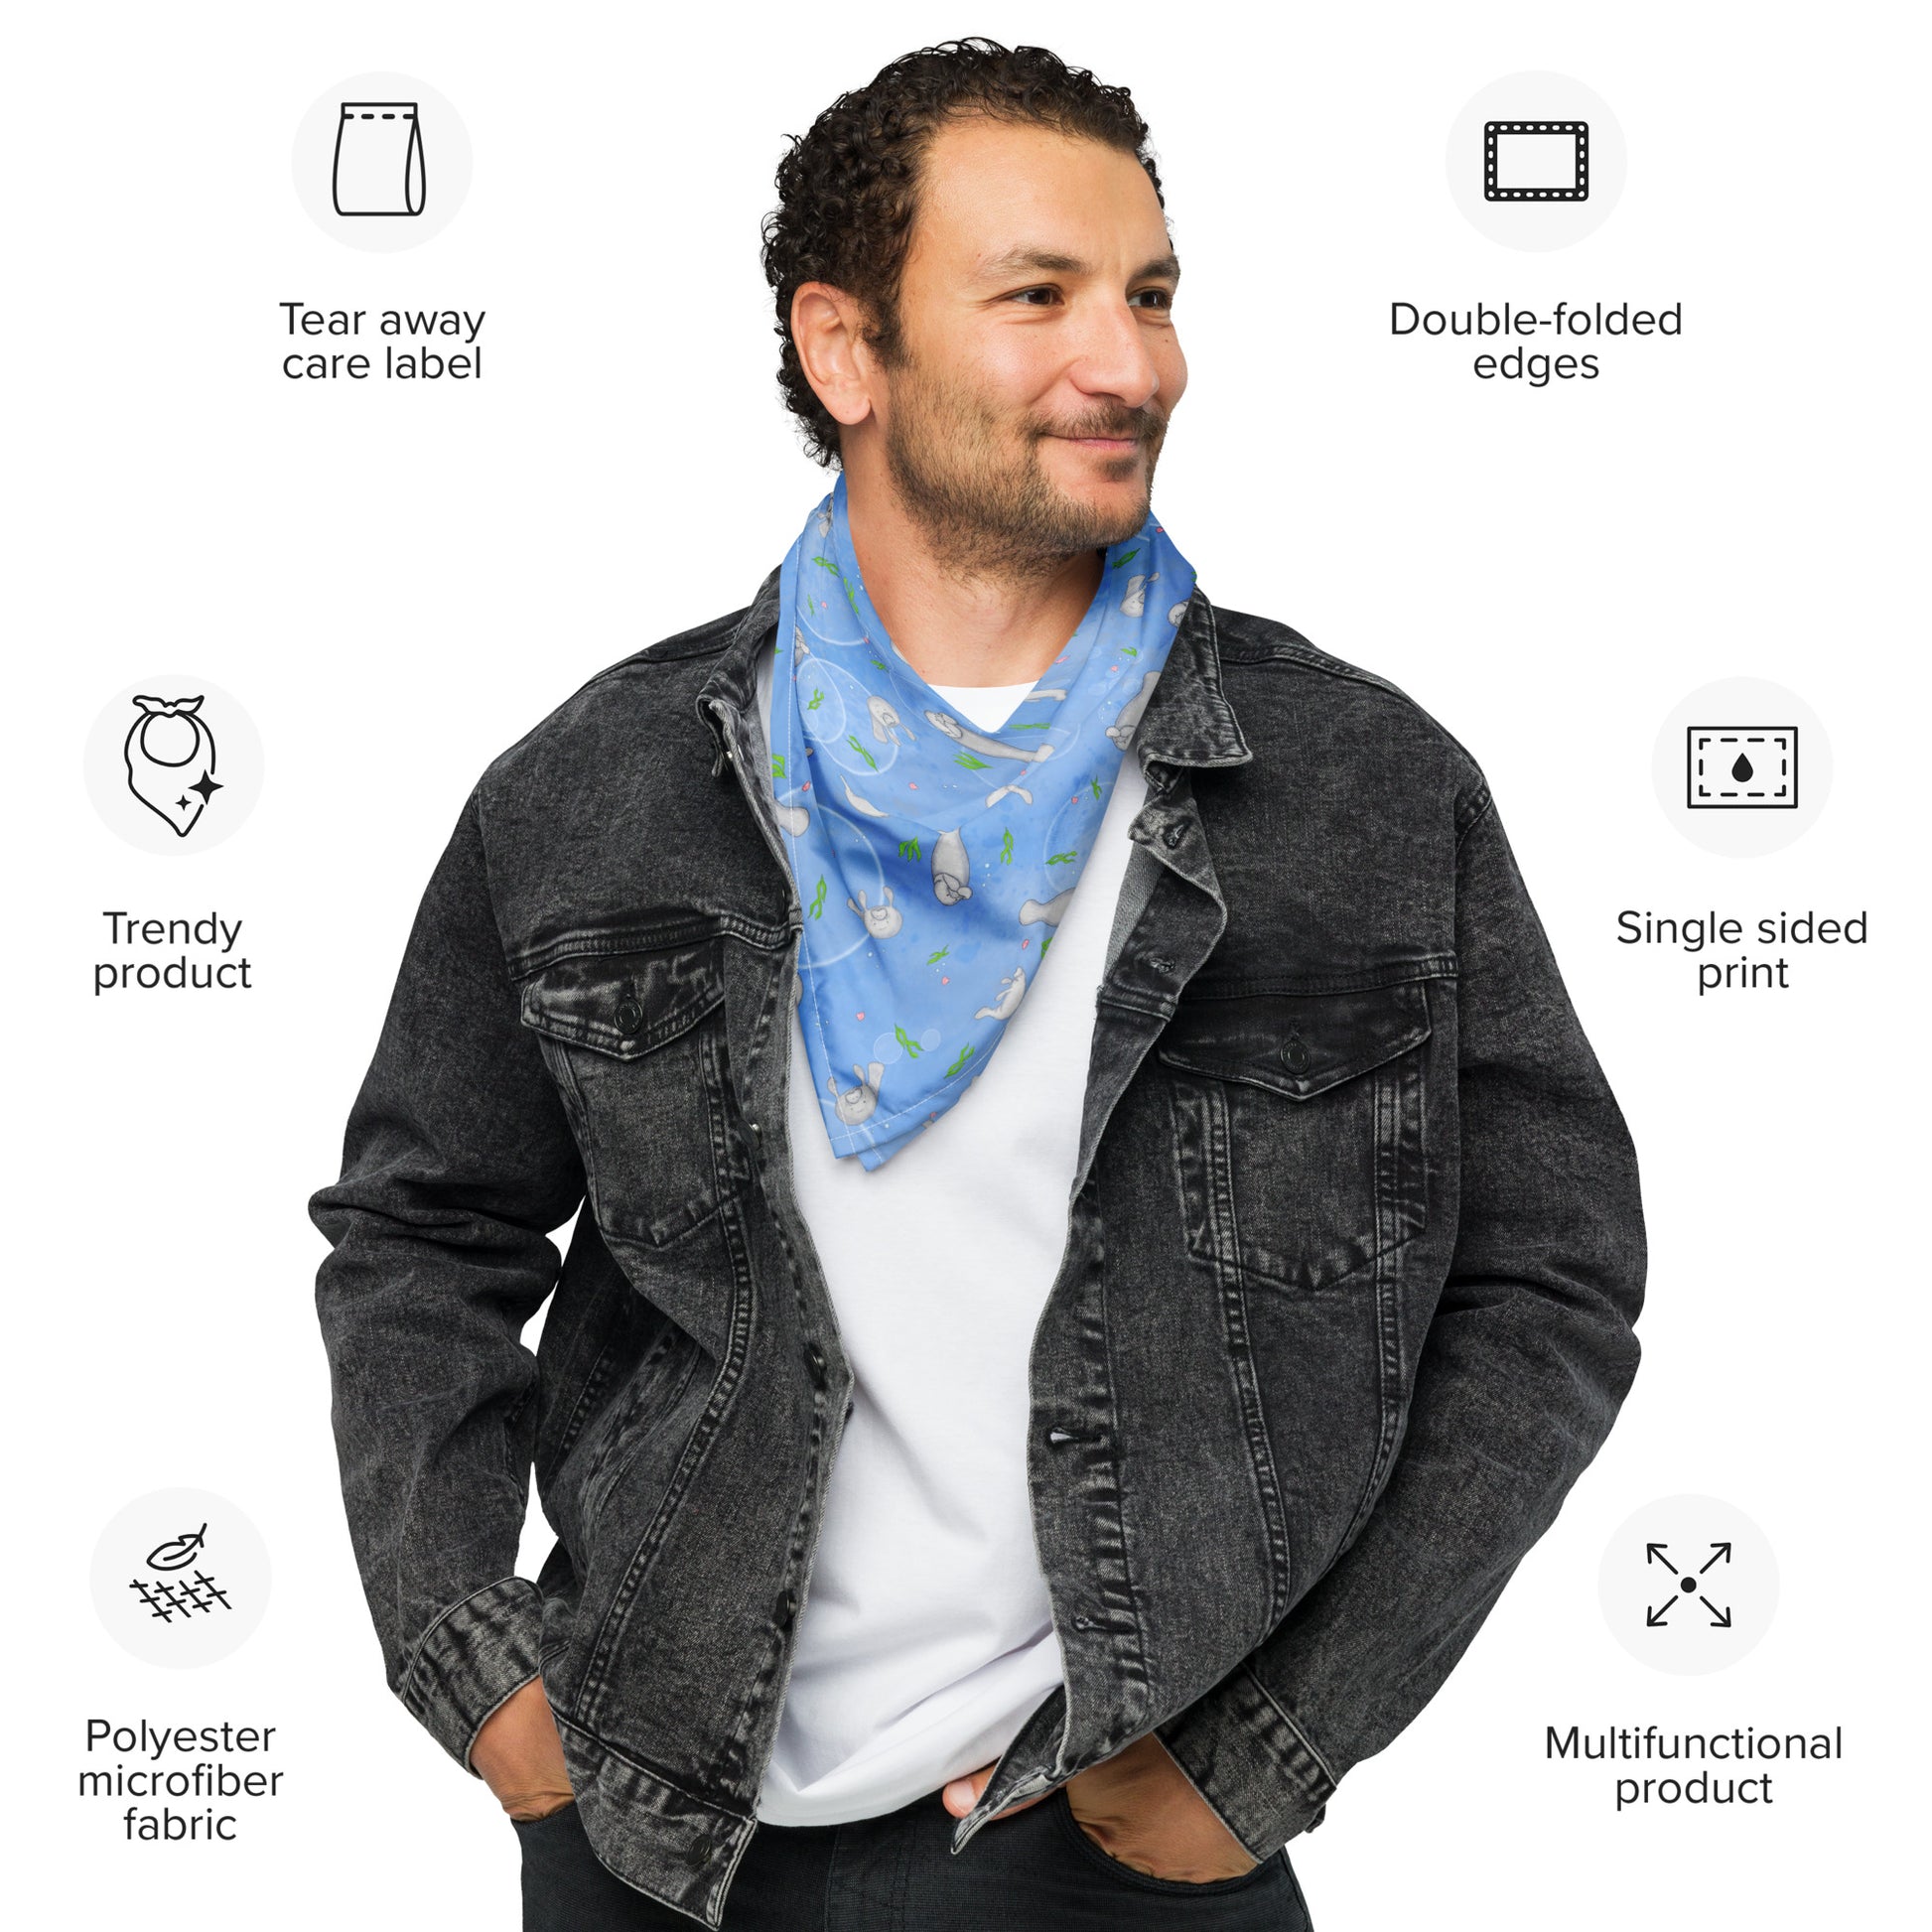 Manatee bandana. Shown as a neck bandana on a male model. Features patterned design of hand-illustrated manatees, seaweed, seashells, and bubbles on a blue  background.